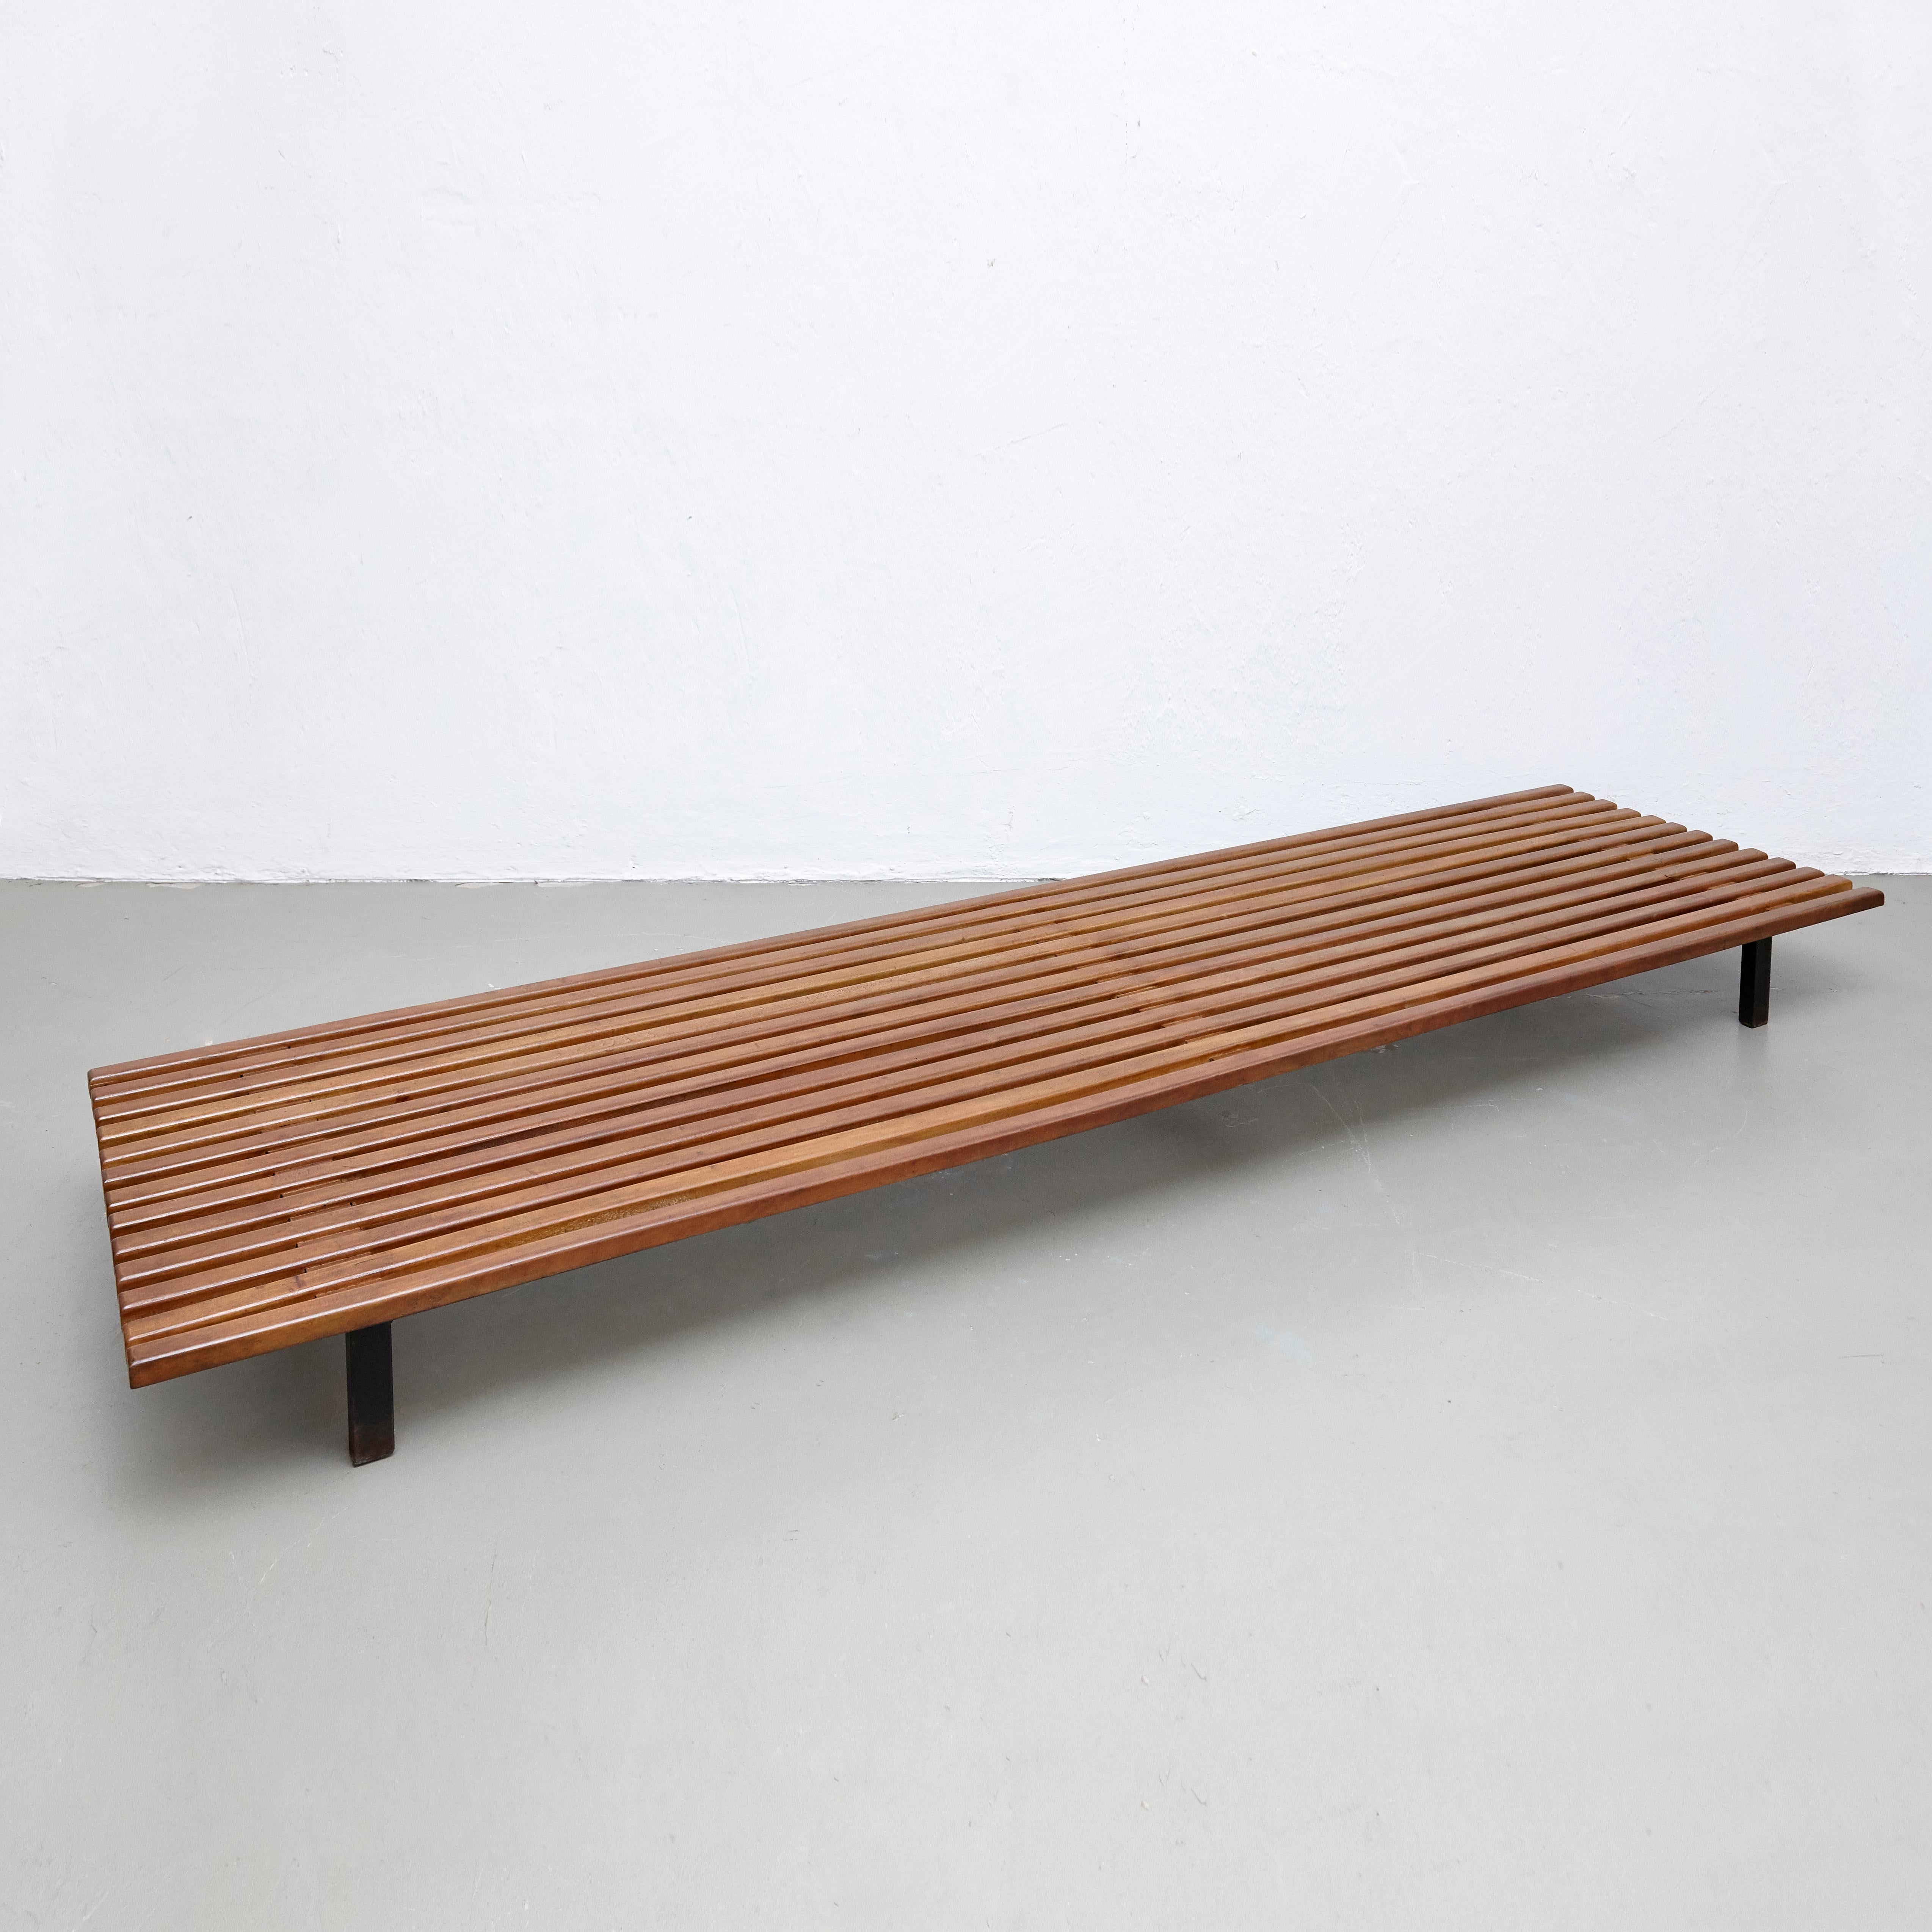 Bench designed by Charlotte Perriand, circa 1950.
This model is with 13 slats of wood.
Edited by Steph Simon.

Wood, metal frame legs.

Provenance: Cansado, Mauritania (Africa).

In good original condition, with minor wear consistent with